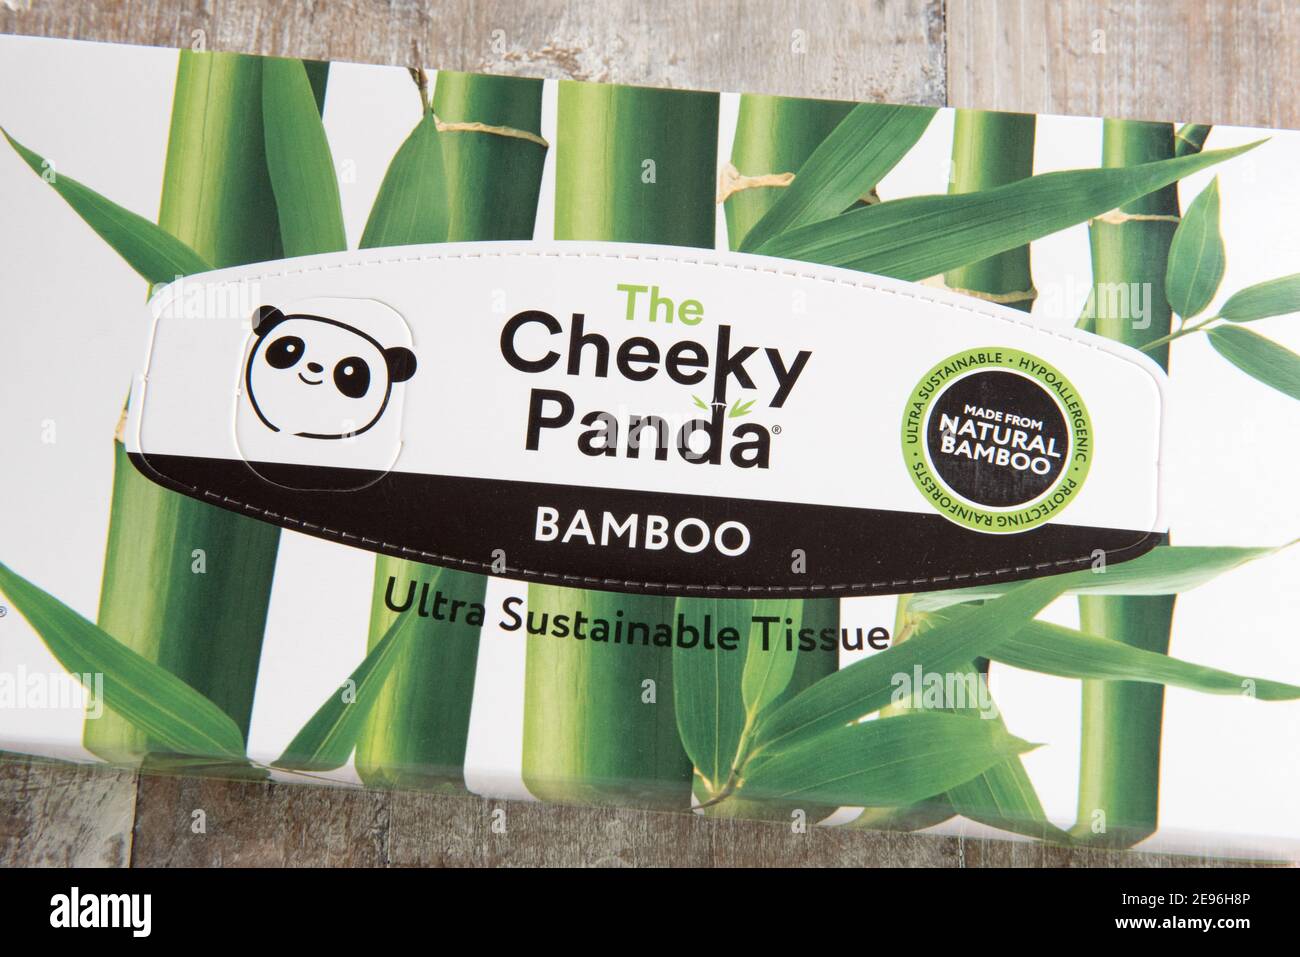 Box of The Cheeky Panda tissue or tissues made from ultra sustainable natural Bamboo on reclained wood background Stock Photo